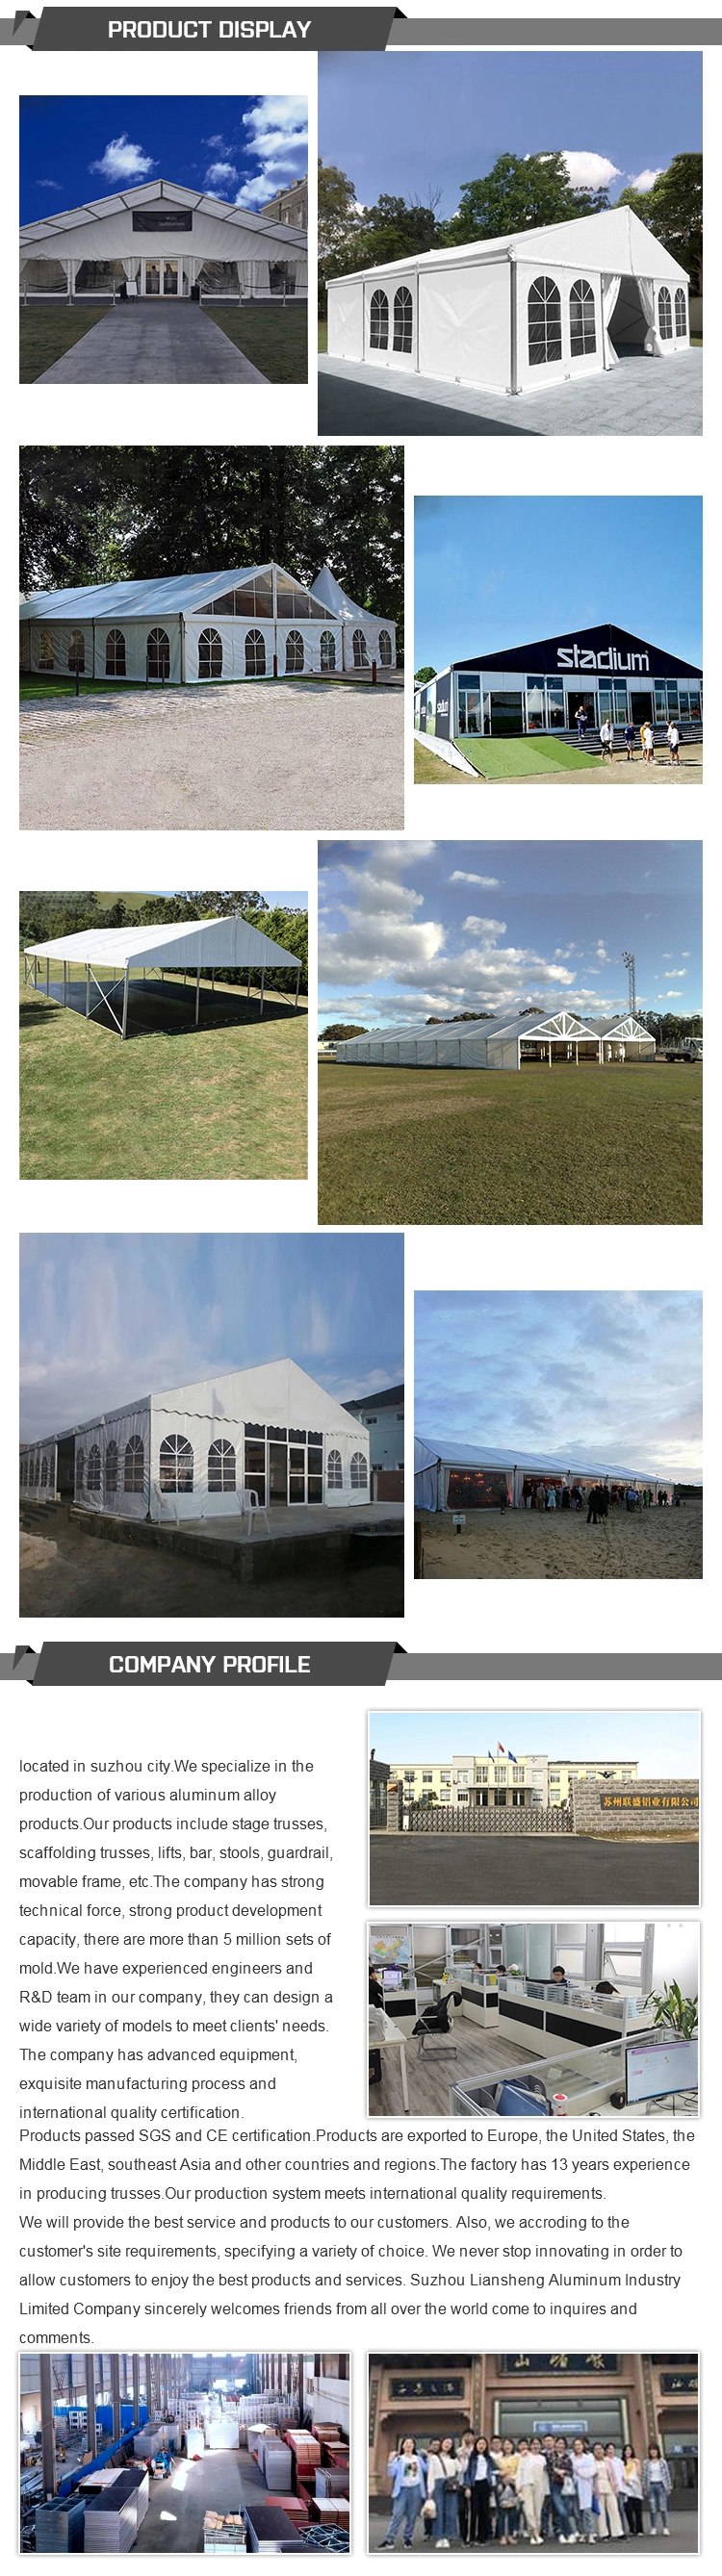 500 Seater Wedding White Marquee Outdoor Event Tents Large